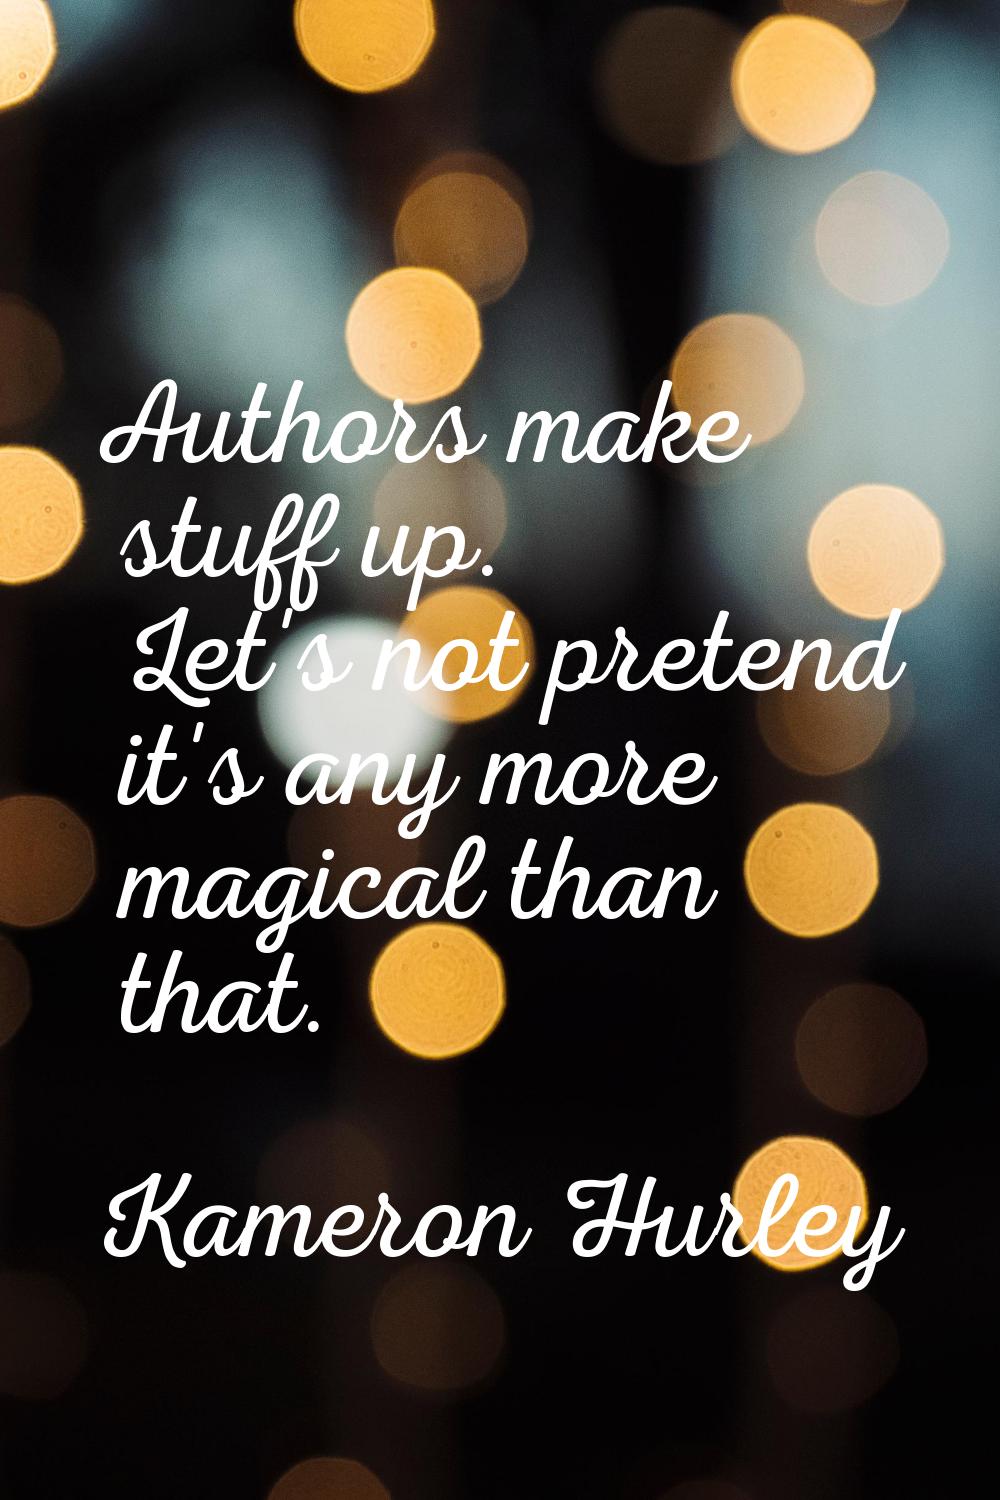 Authors make stuff up. Let's not pretend it's any more magical than that.